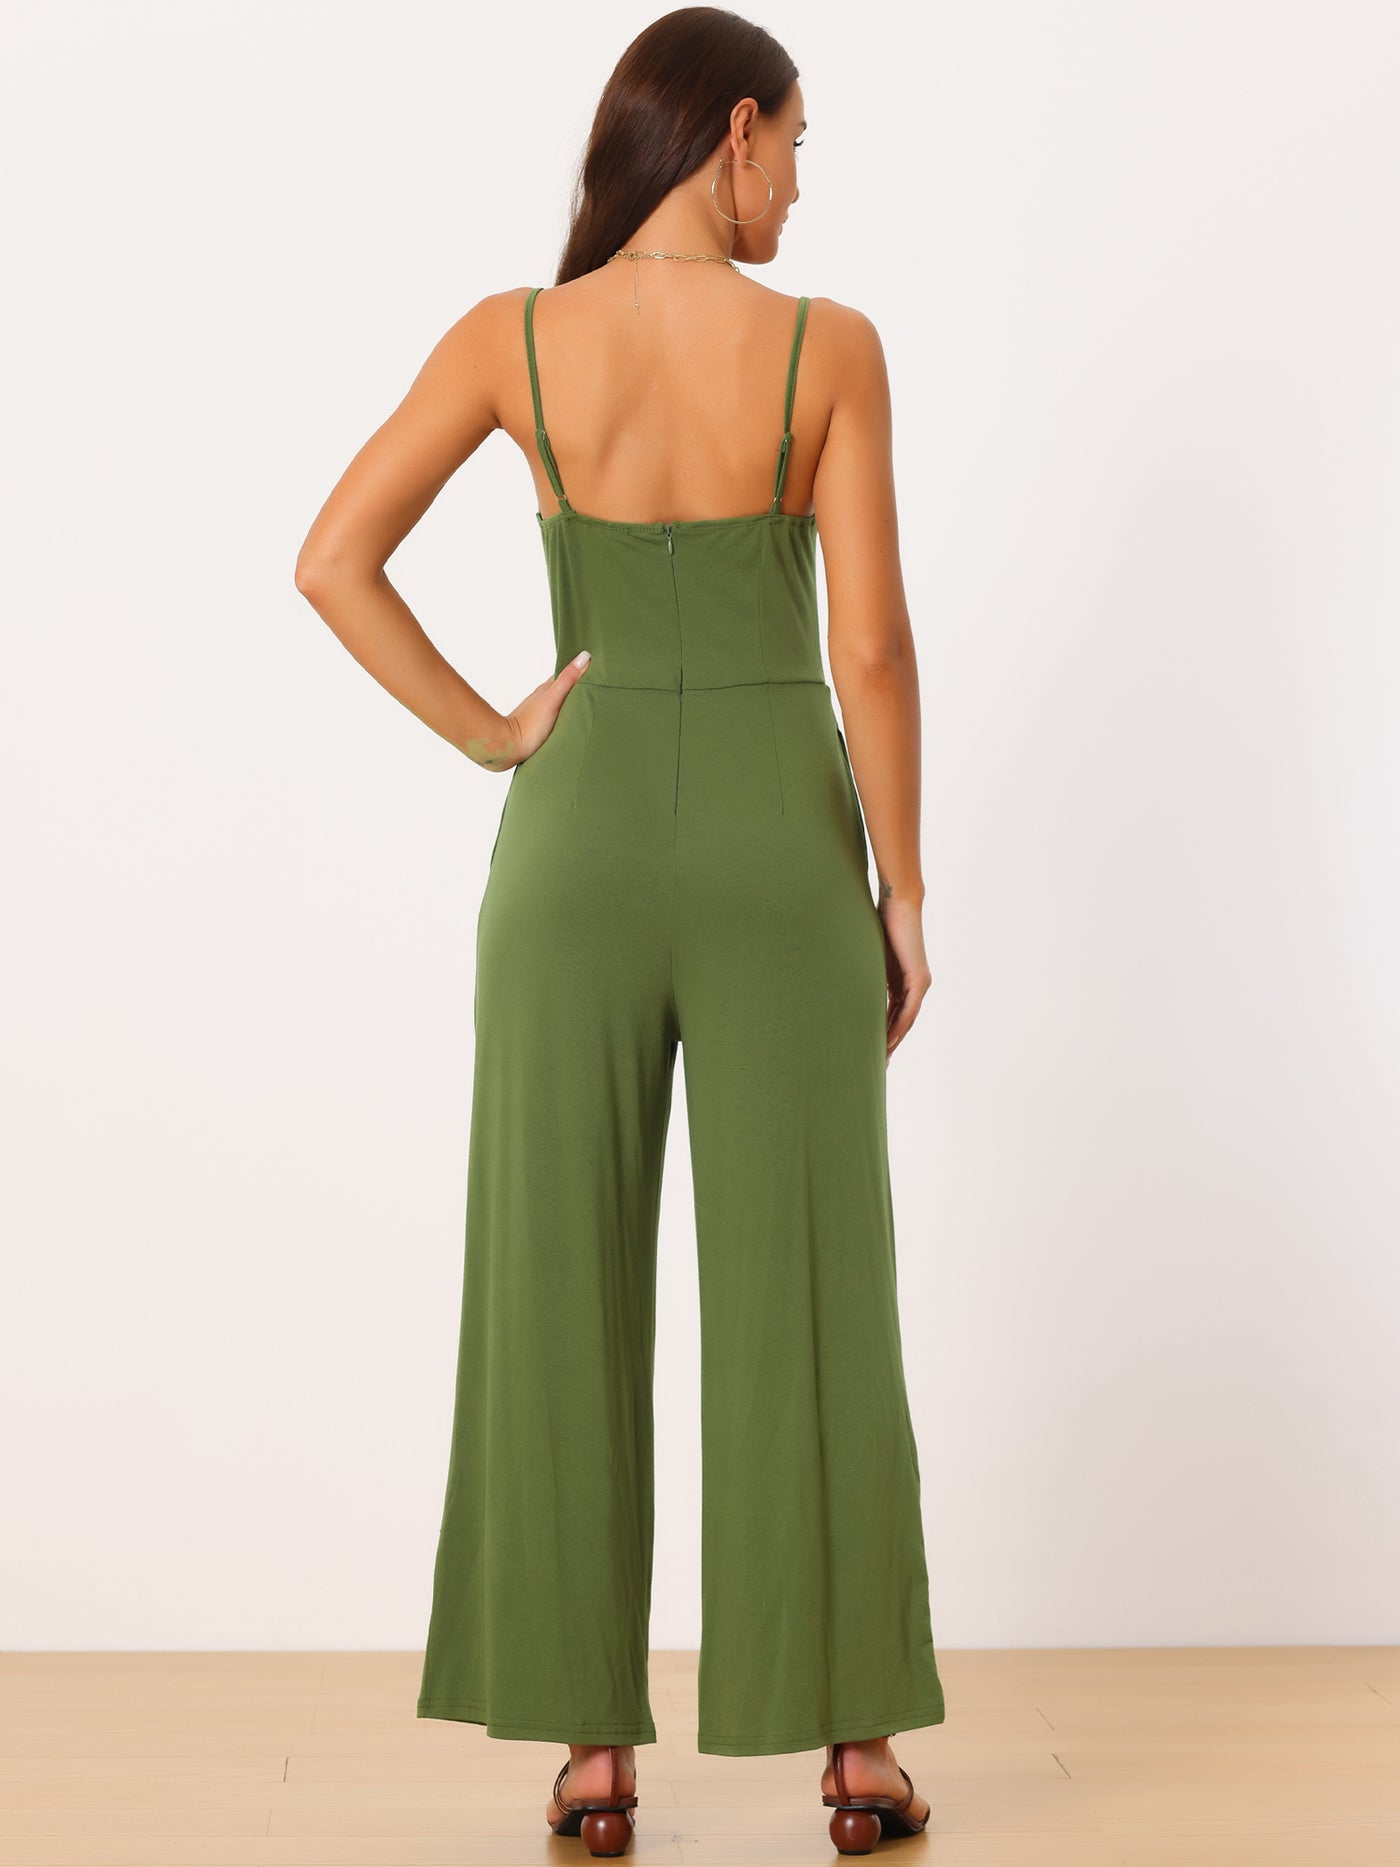 Bublédon Spaghetti Straps Ruched Drawstring Wide Leg Romper Casual Jumpsuits with Pockets